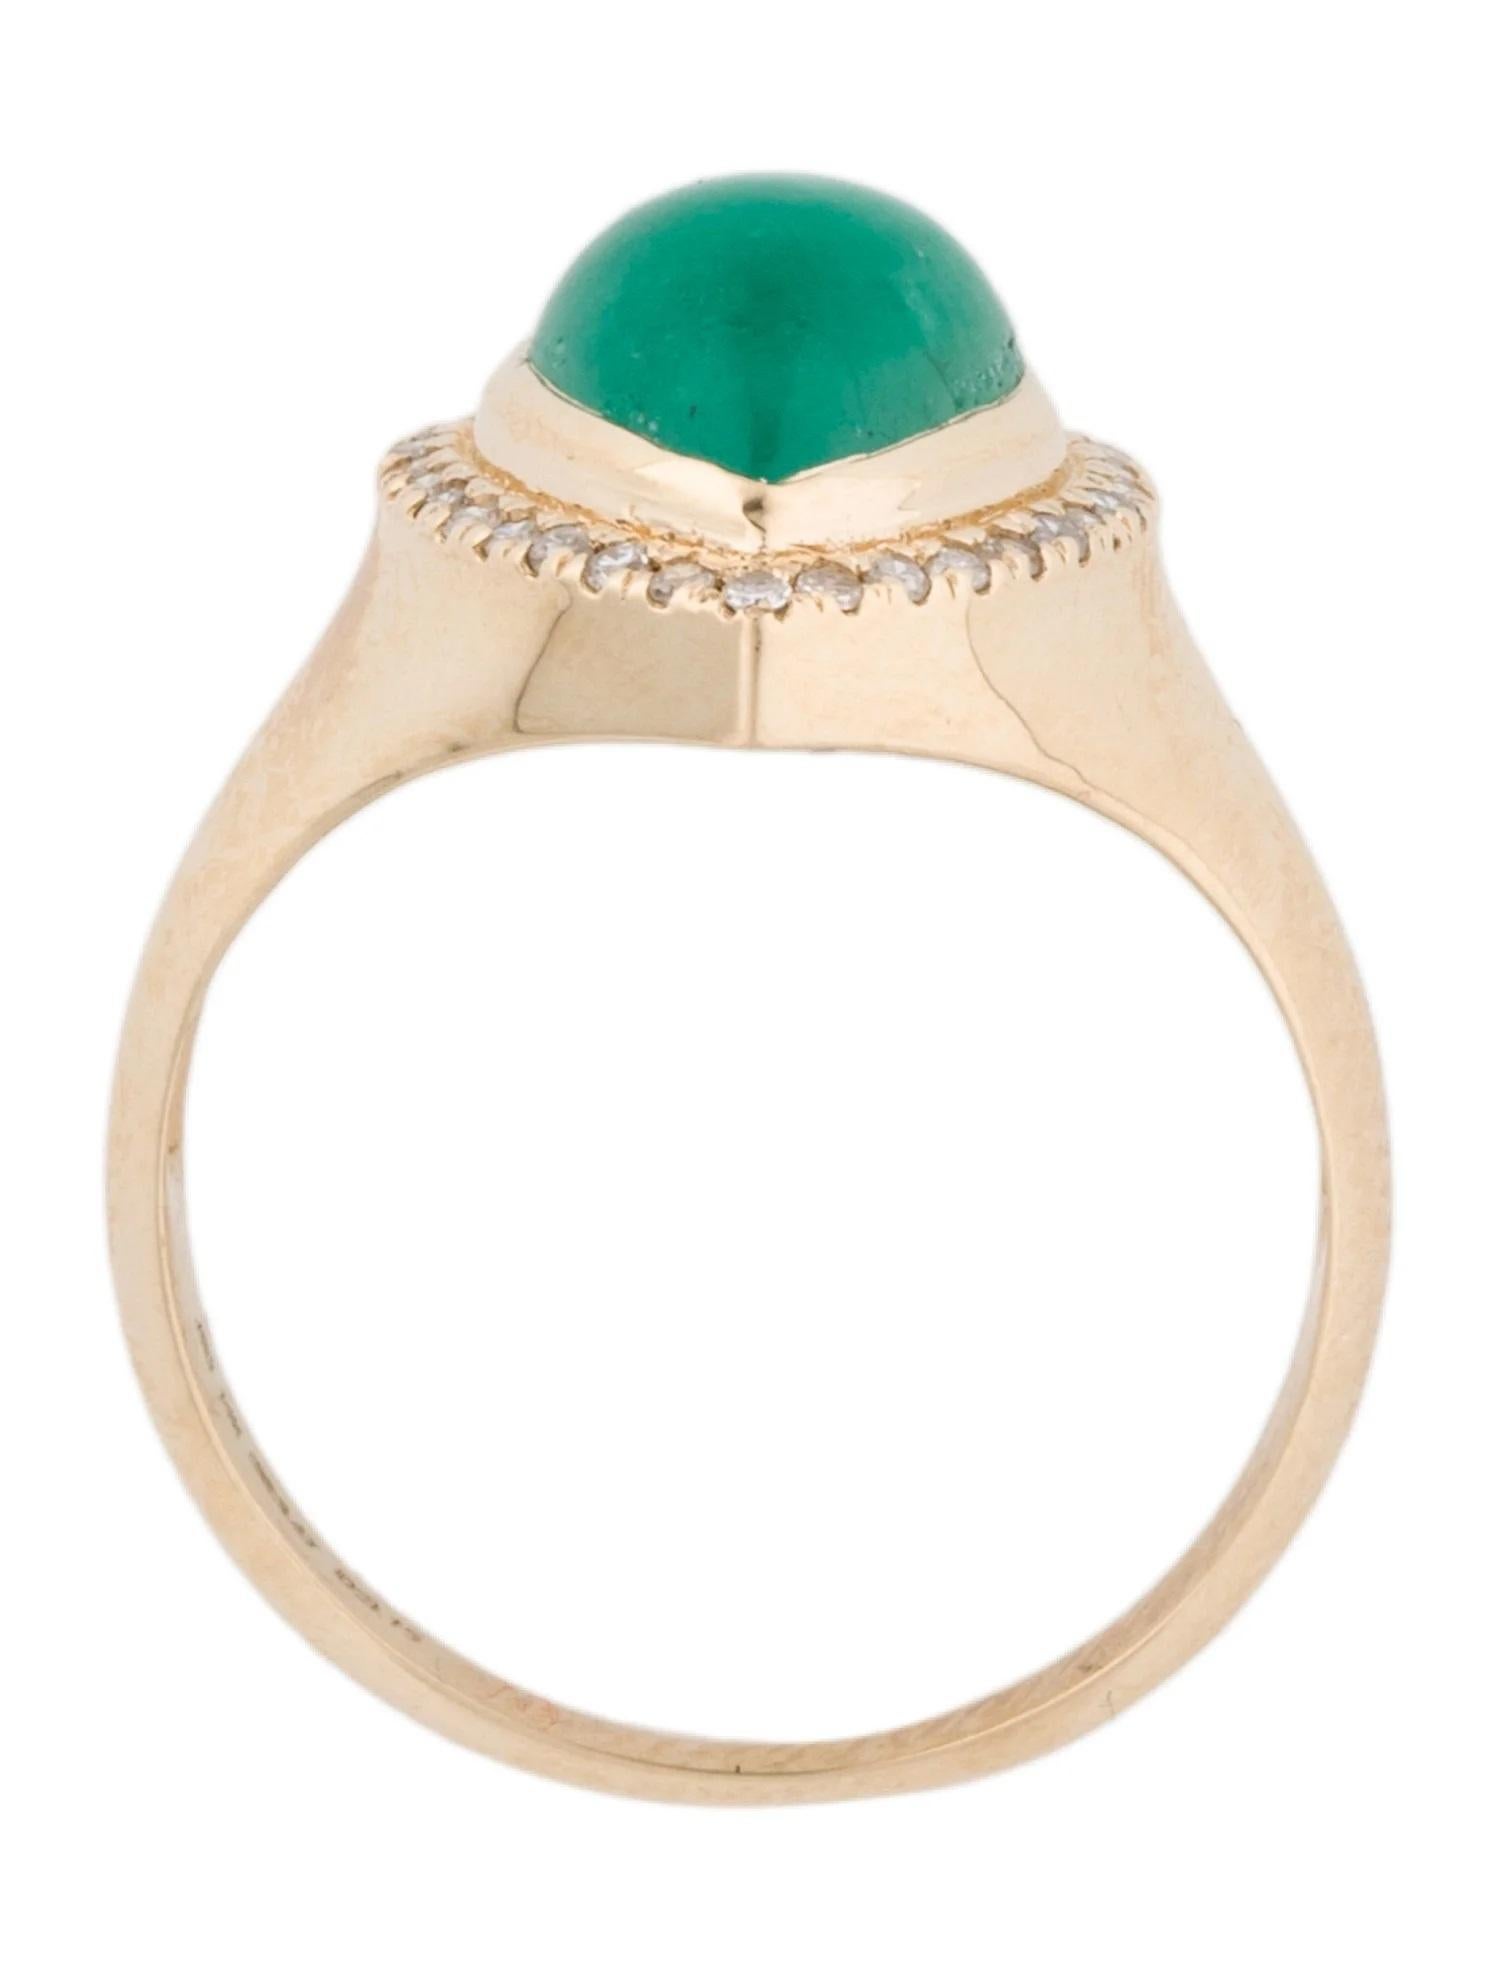 14K Emerald & Diamond Cocktail Ring  Pear Shaped Cabochon Emerald  Yellow Gold In New Condition For Sale In Holtsville, NY